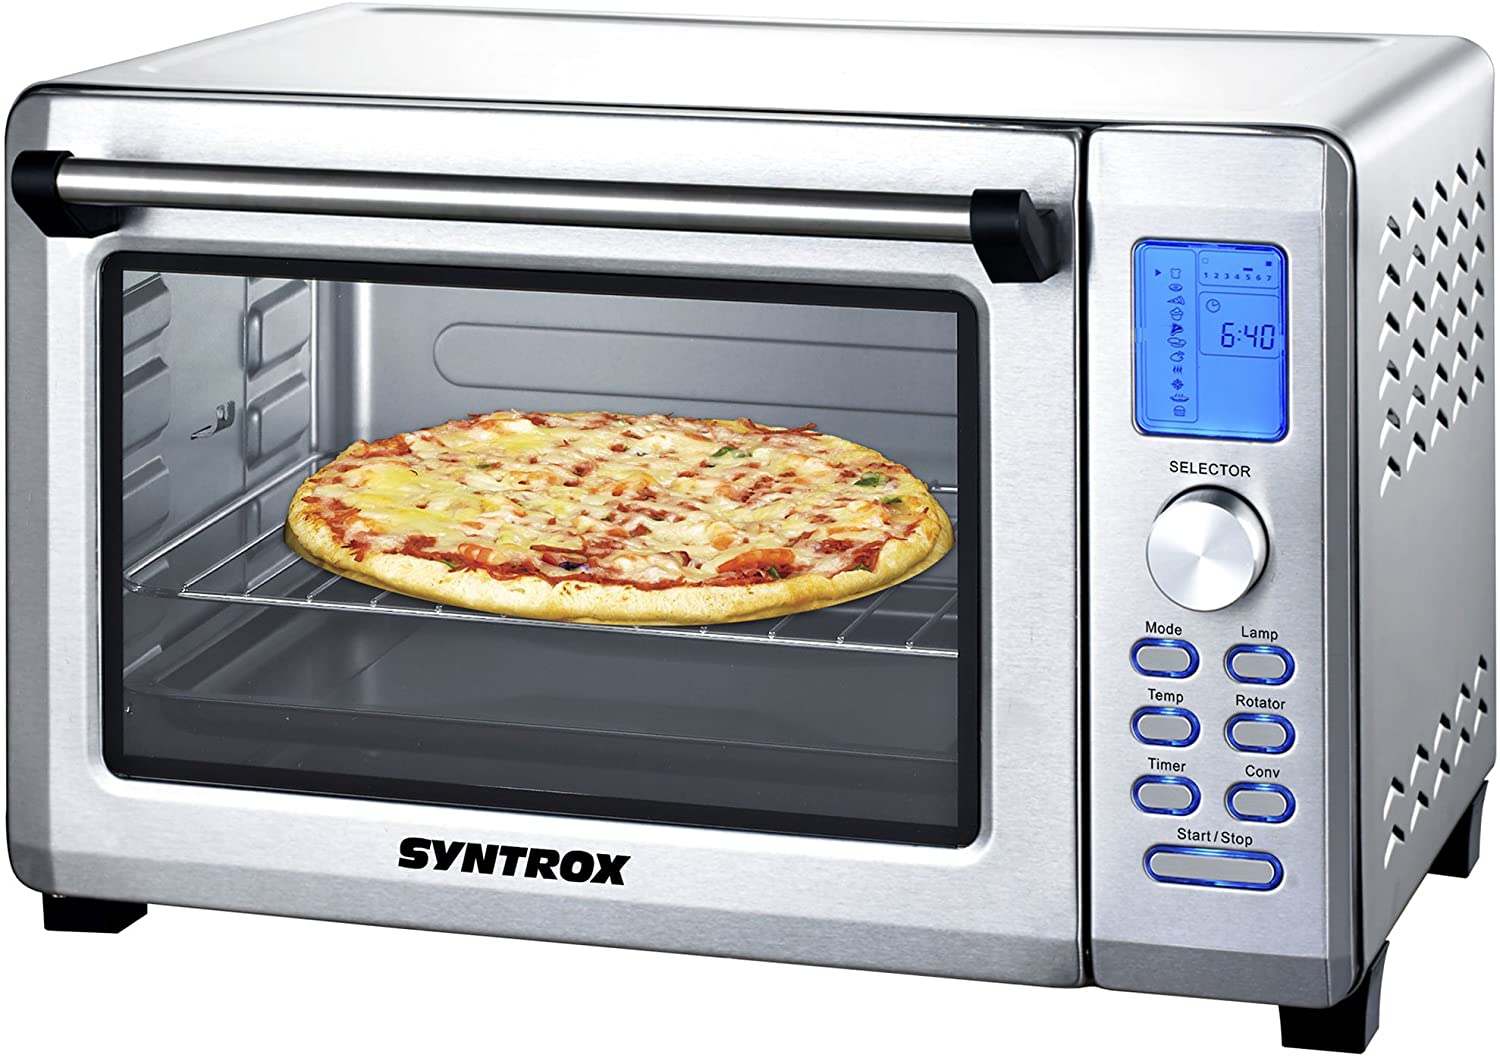 Syntrox Germany 38 Litre Digital Stainless Steel Mini Stand Oven with Recirculation and Rotisserie Mini Oven Pizza Oven